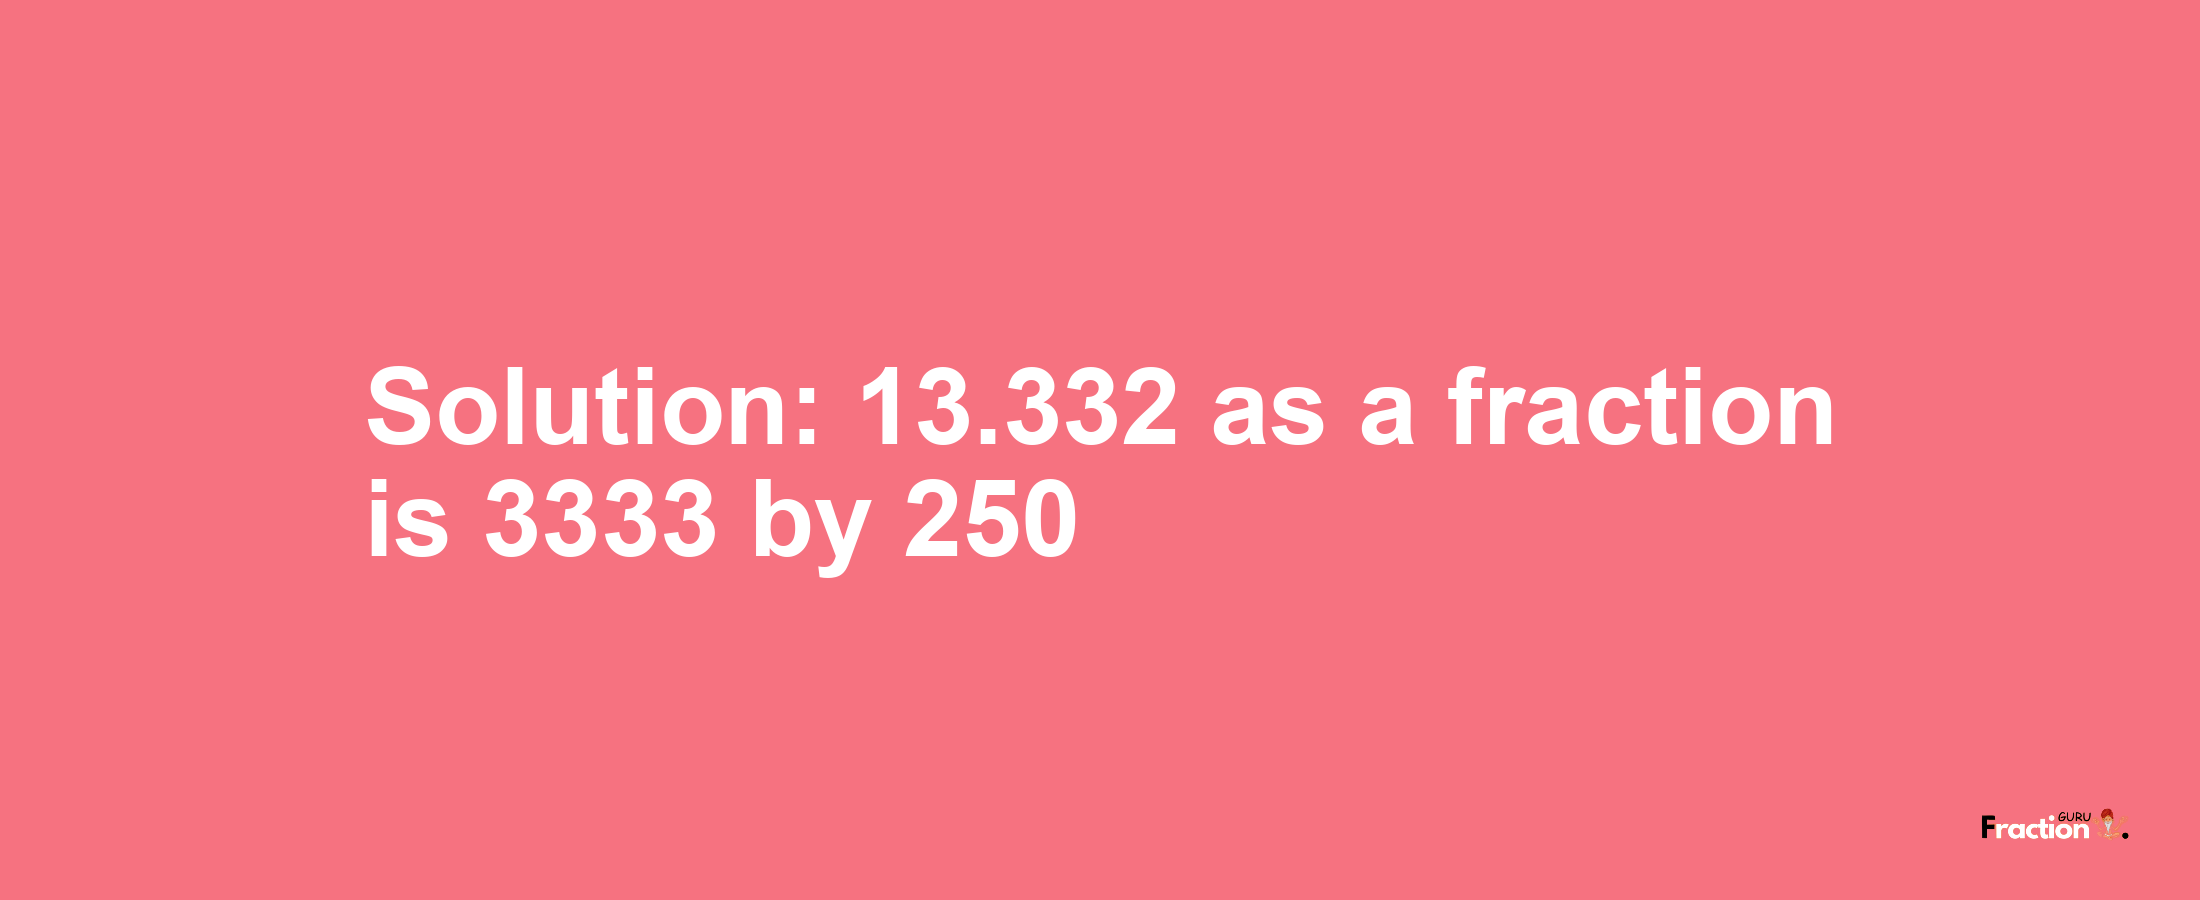 Solution:13.332 as a fraction is 3333/250